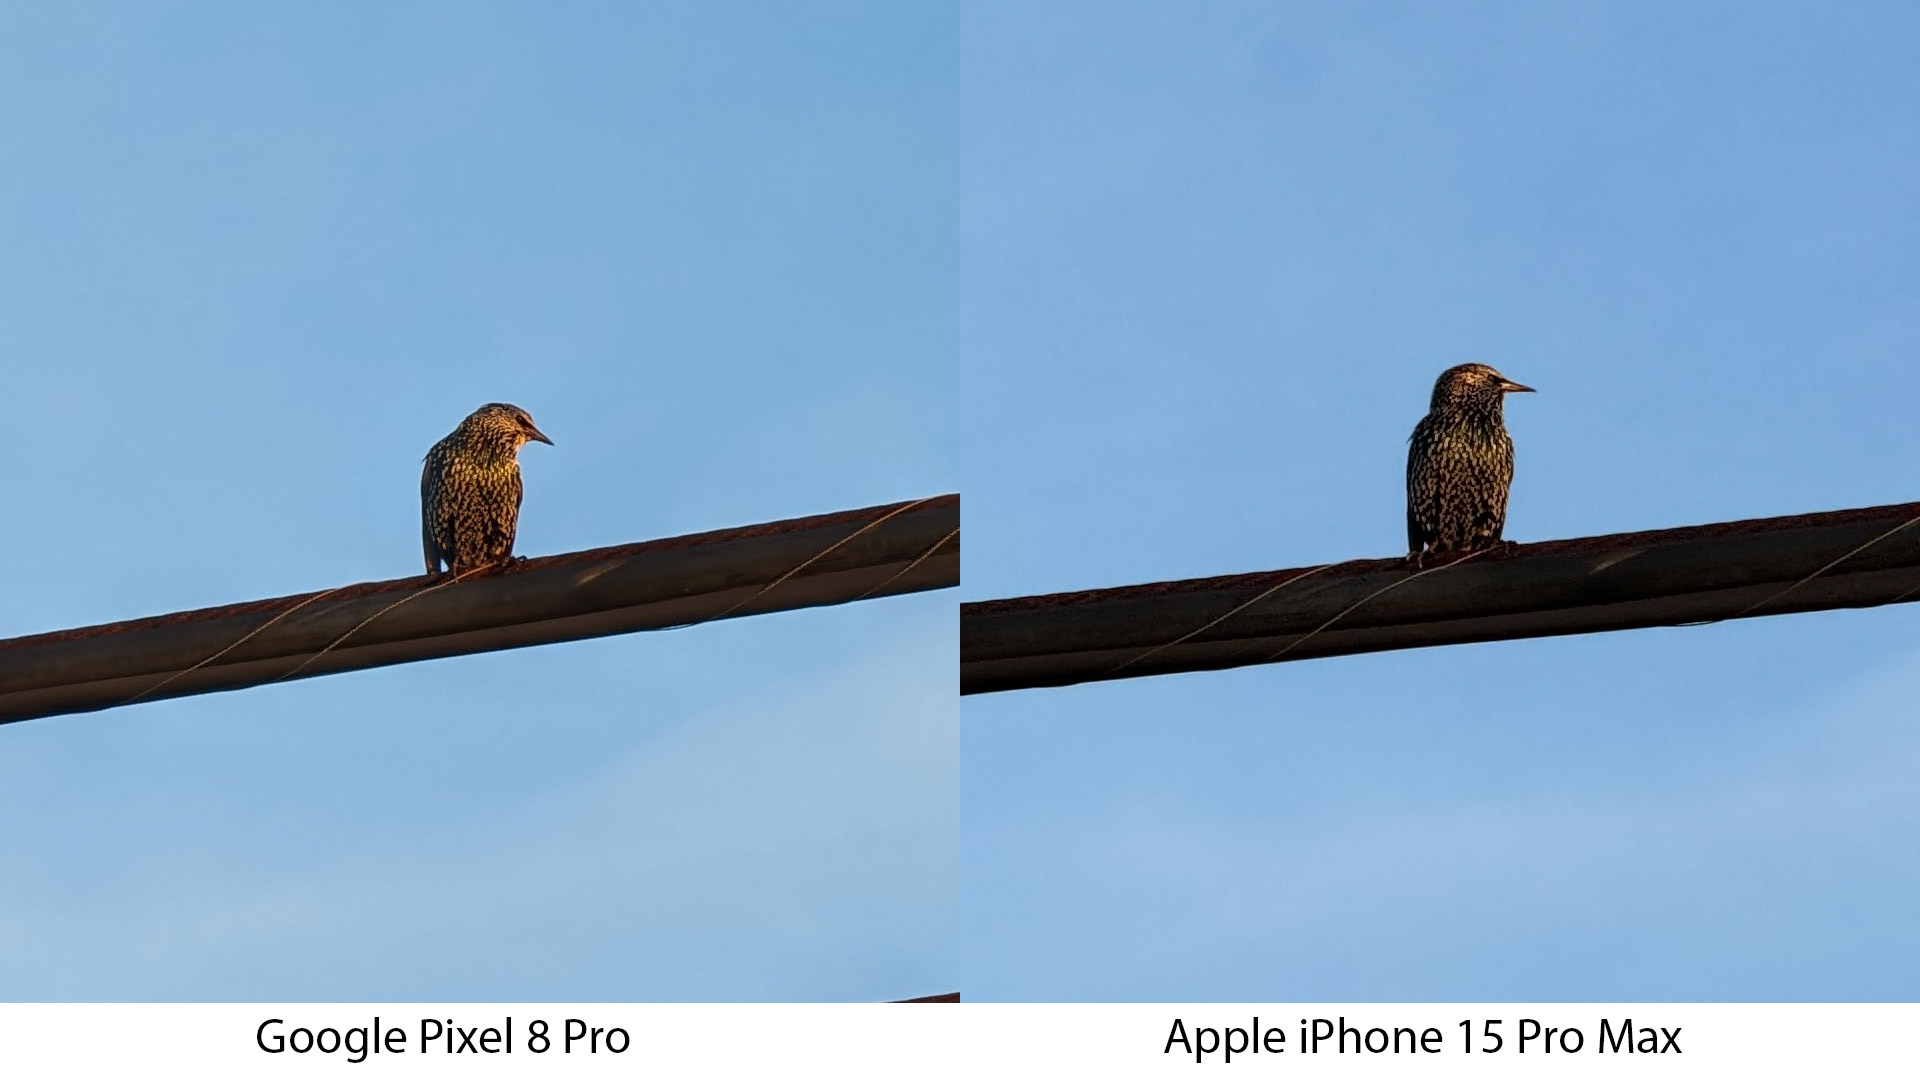 Pixel 8 Pro vs iPhone 15 Pro Max 5Xx zoom test - cropped images